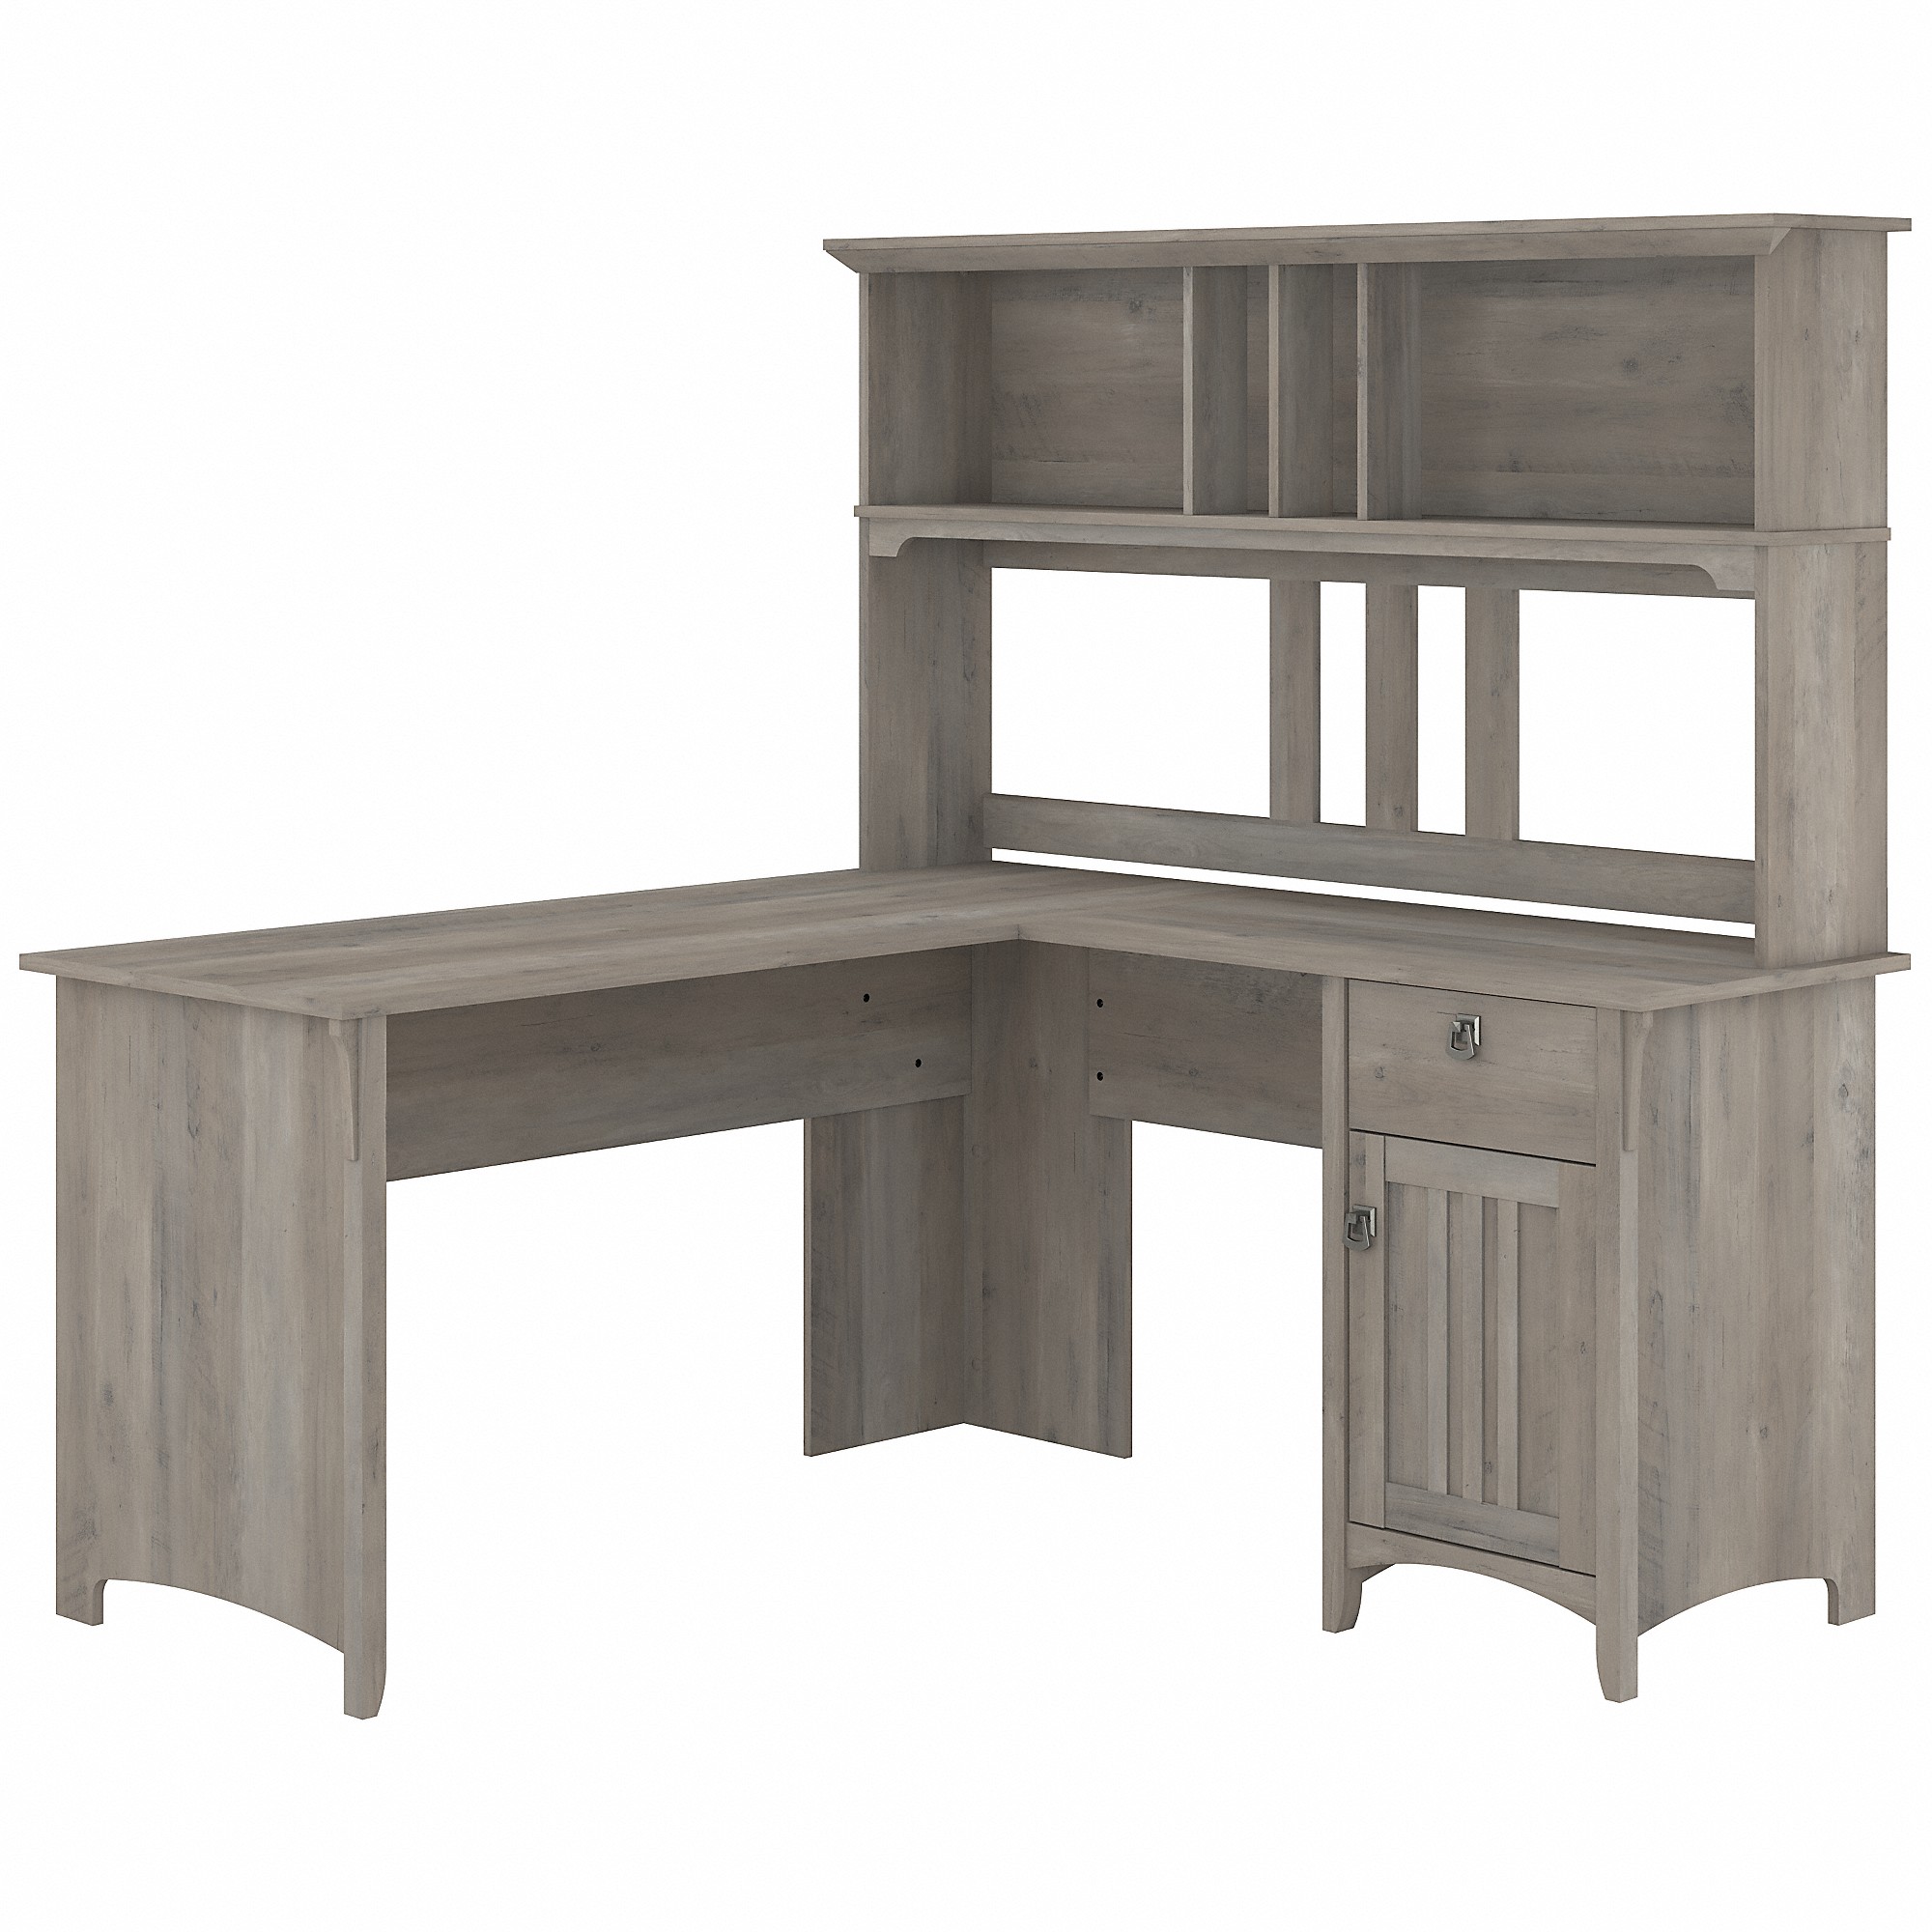 Bush Furniture Salinas 60" L Desk and Hutch with Storage, Driftwood Gray - image 1 of 8